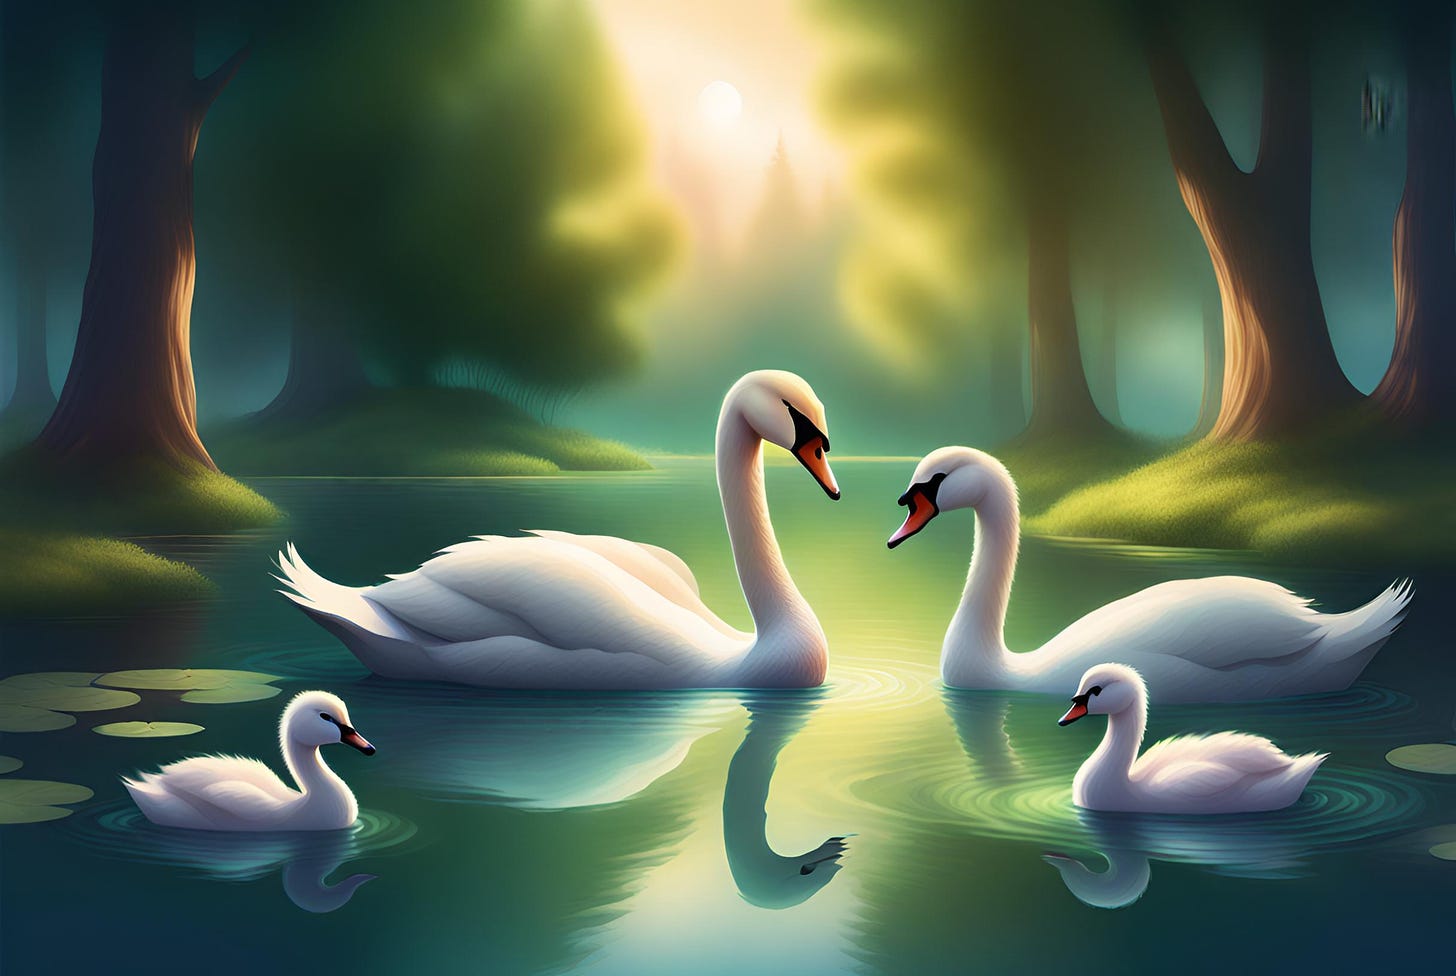 Illustration of a family of swans on a calm pond